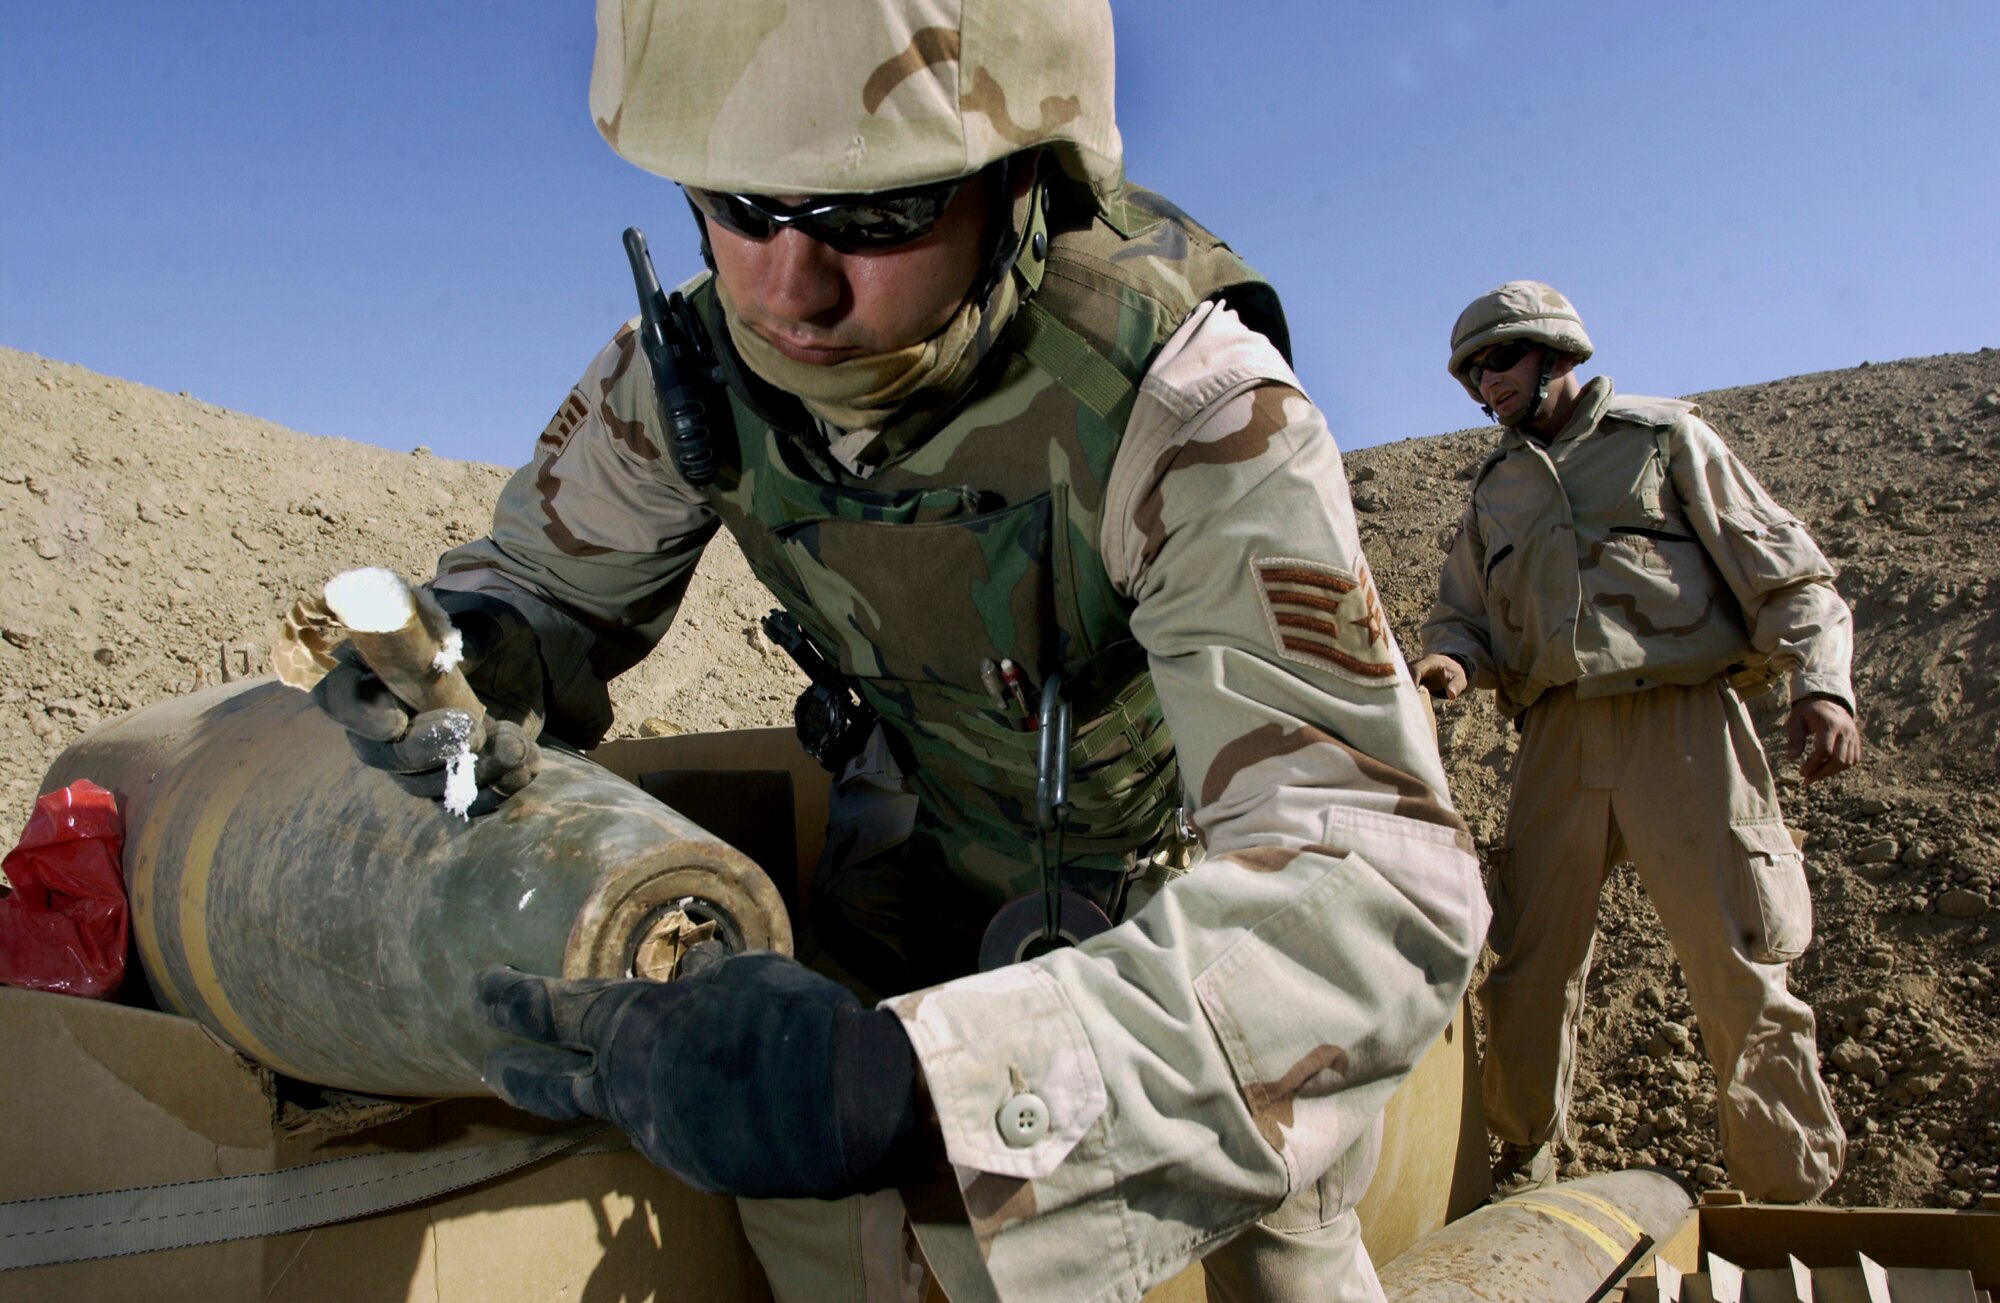 KIRKUK AIR BASE, Iraq -- Staff Sgt. Doug Baker (foreground) and Latvian navy Warrant Officer Guntars Jeromans prepare to destroy more than 180 120 mm mortar rounds.  Baker carefully loads PE-4, a British plastic explosive, into a 1,000-pound "dumb bomb" to detonate the load of more than 10,000 pounds of recovered Iraqi ordinance.  Baker and Jeromans are both assigned to the 506th Expeditionary Civil Engineer Squadron's explosive ordnance disposal flight here.  (U.S. Air Force photo by Master Sgt. Keith Reed)